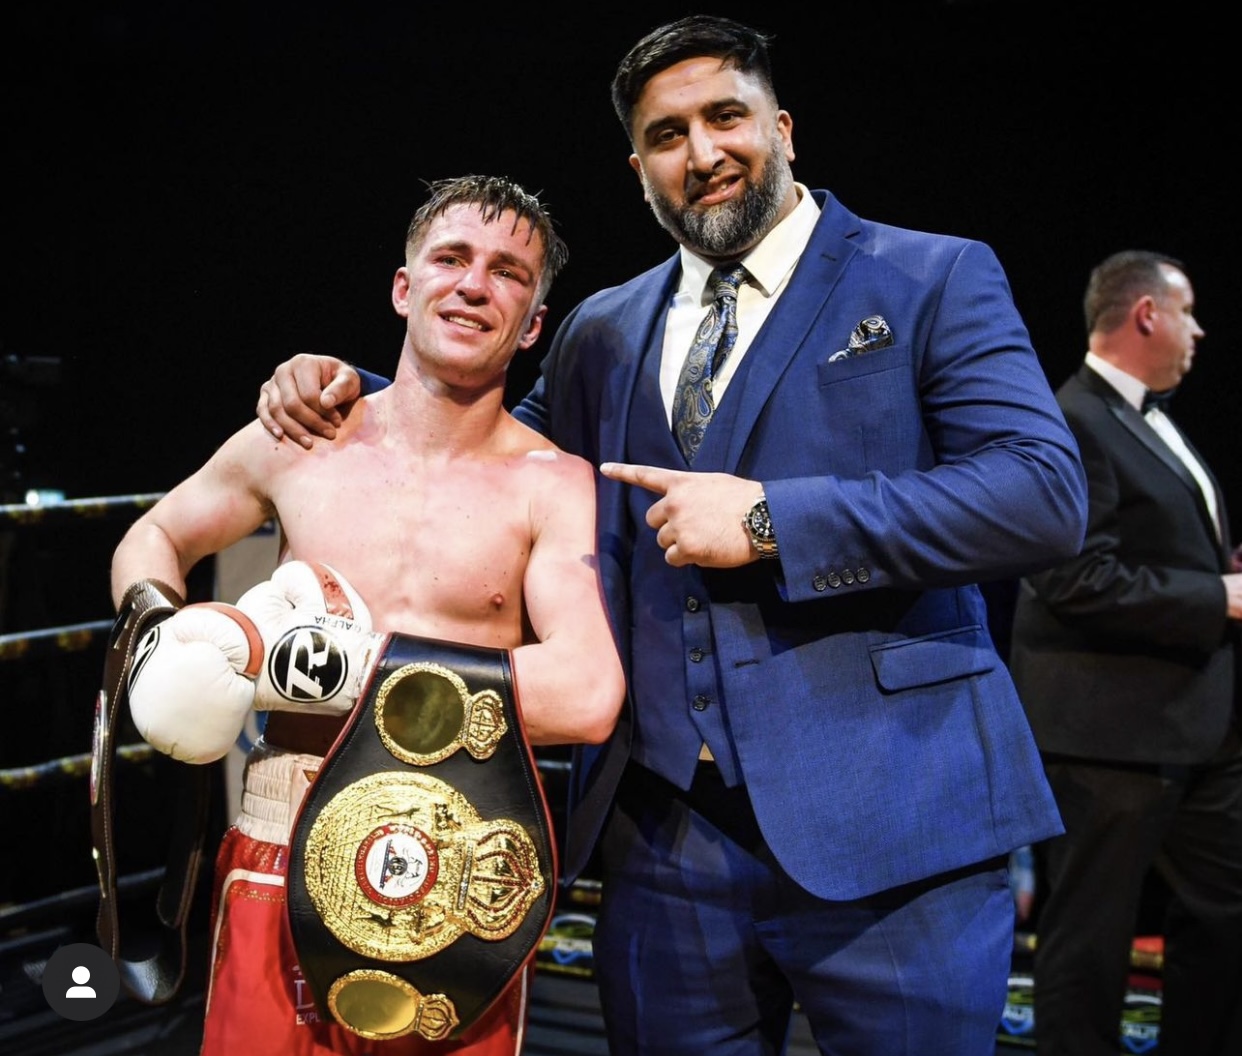 Mould dominated Ghaz and is new WBA Continental champion